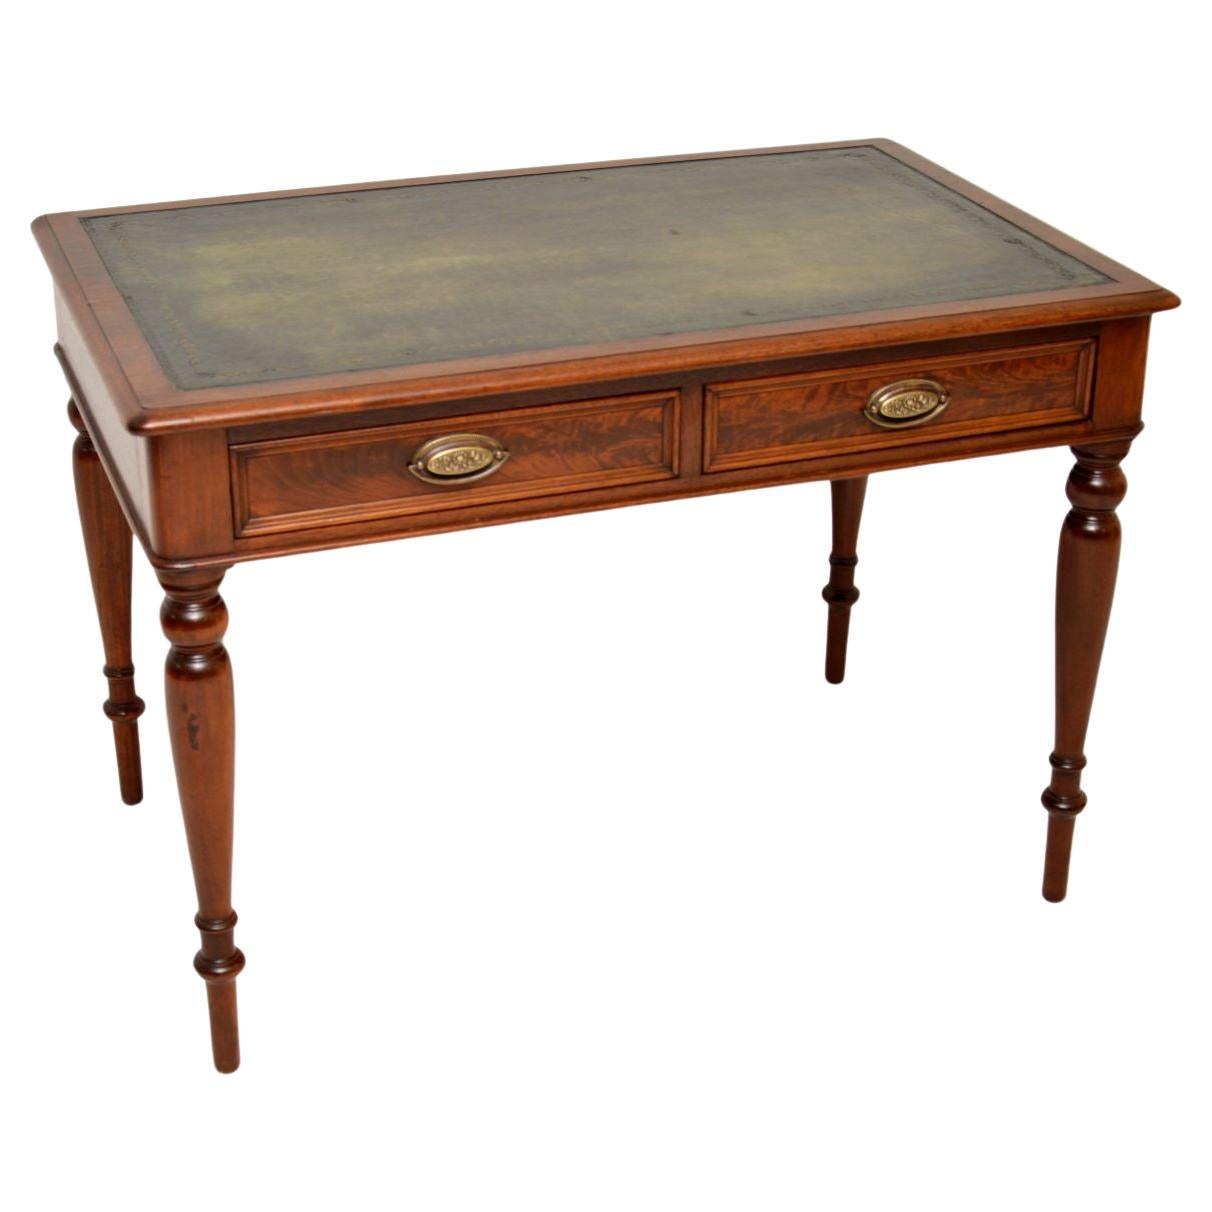 Antique Victorian Writing Table / Desk